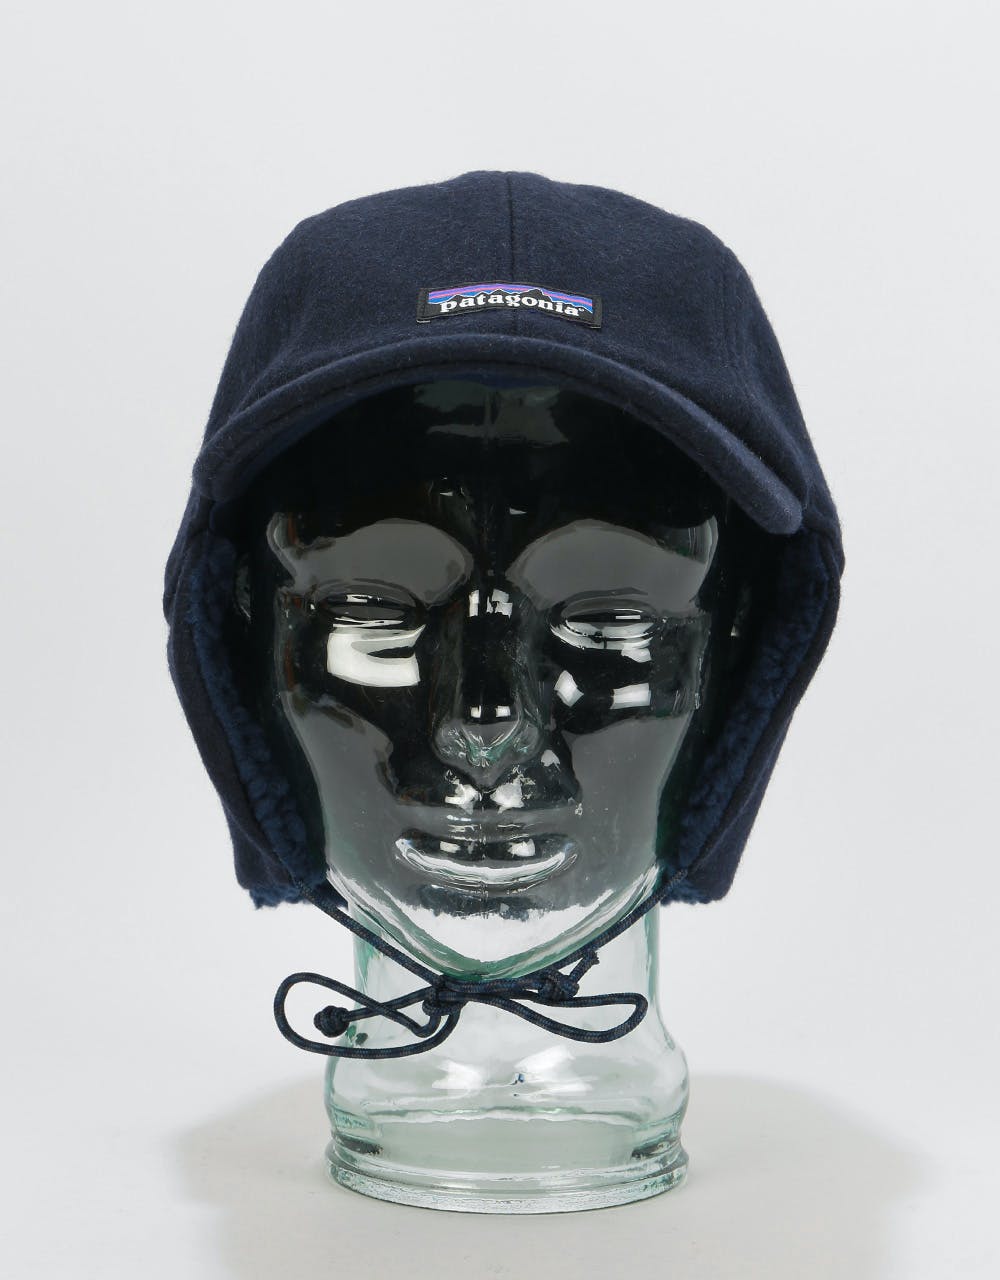 Patagonia Recycled Wool Earflap Cap - Classic Navy